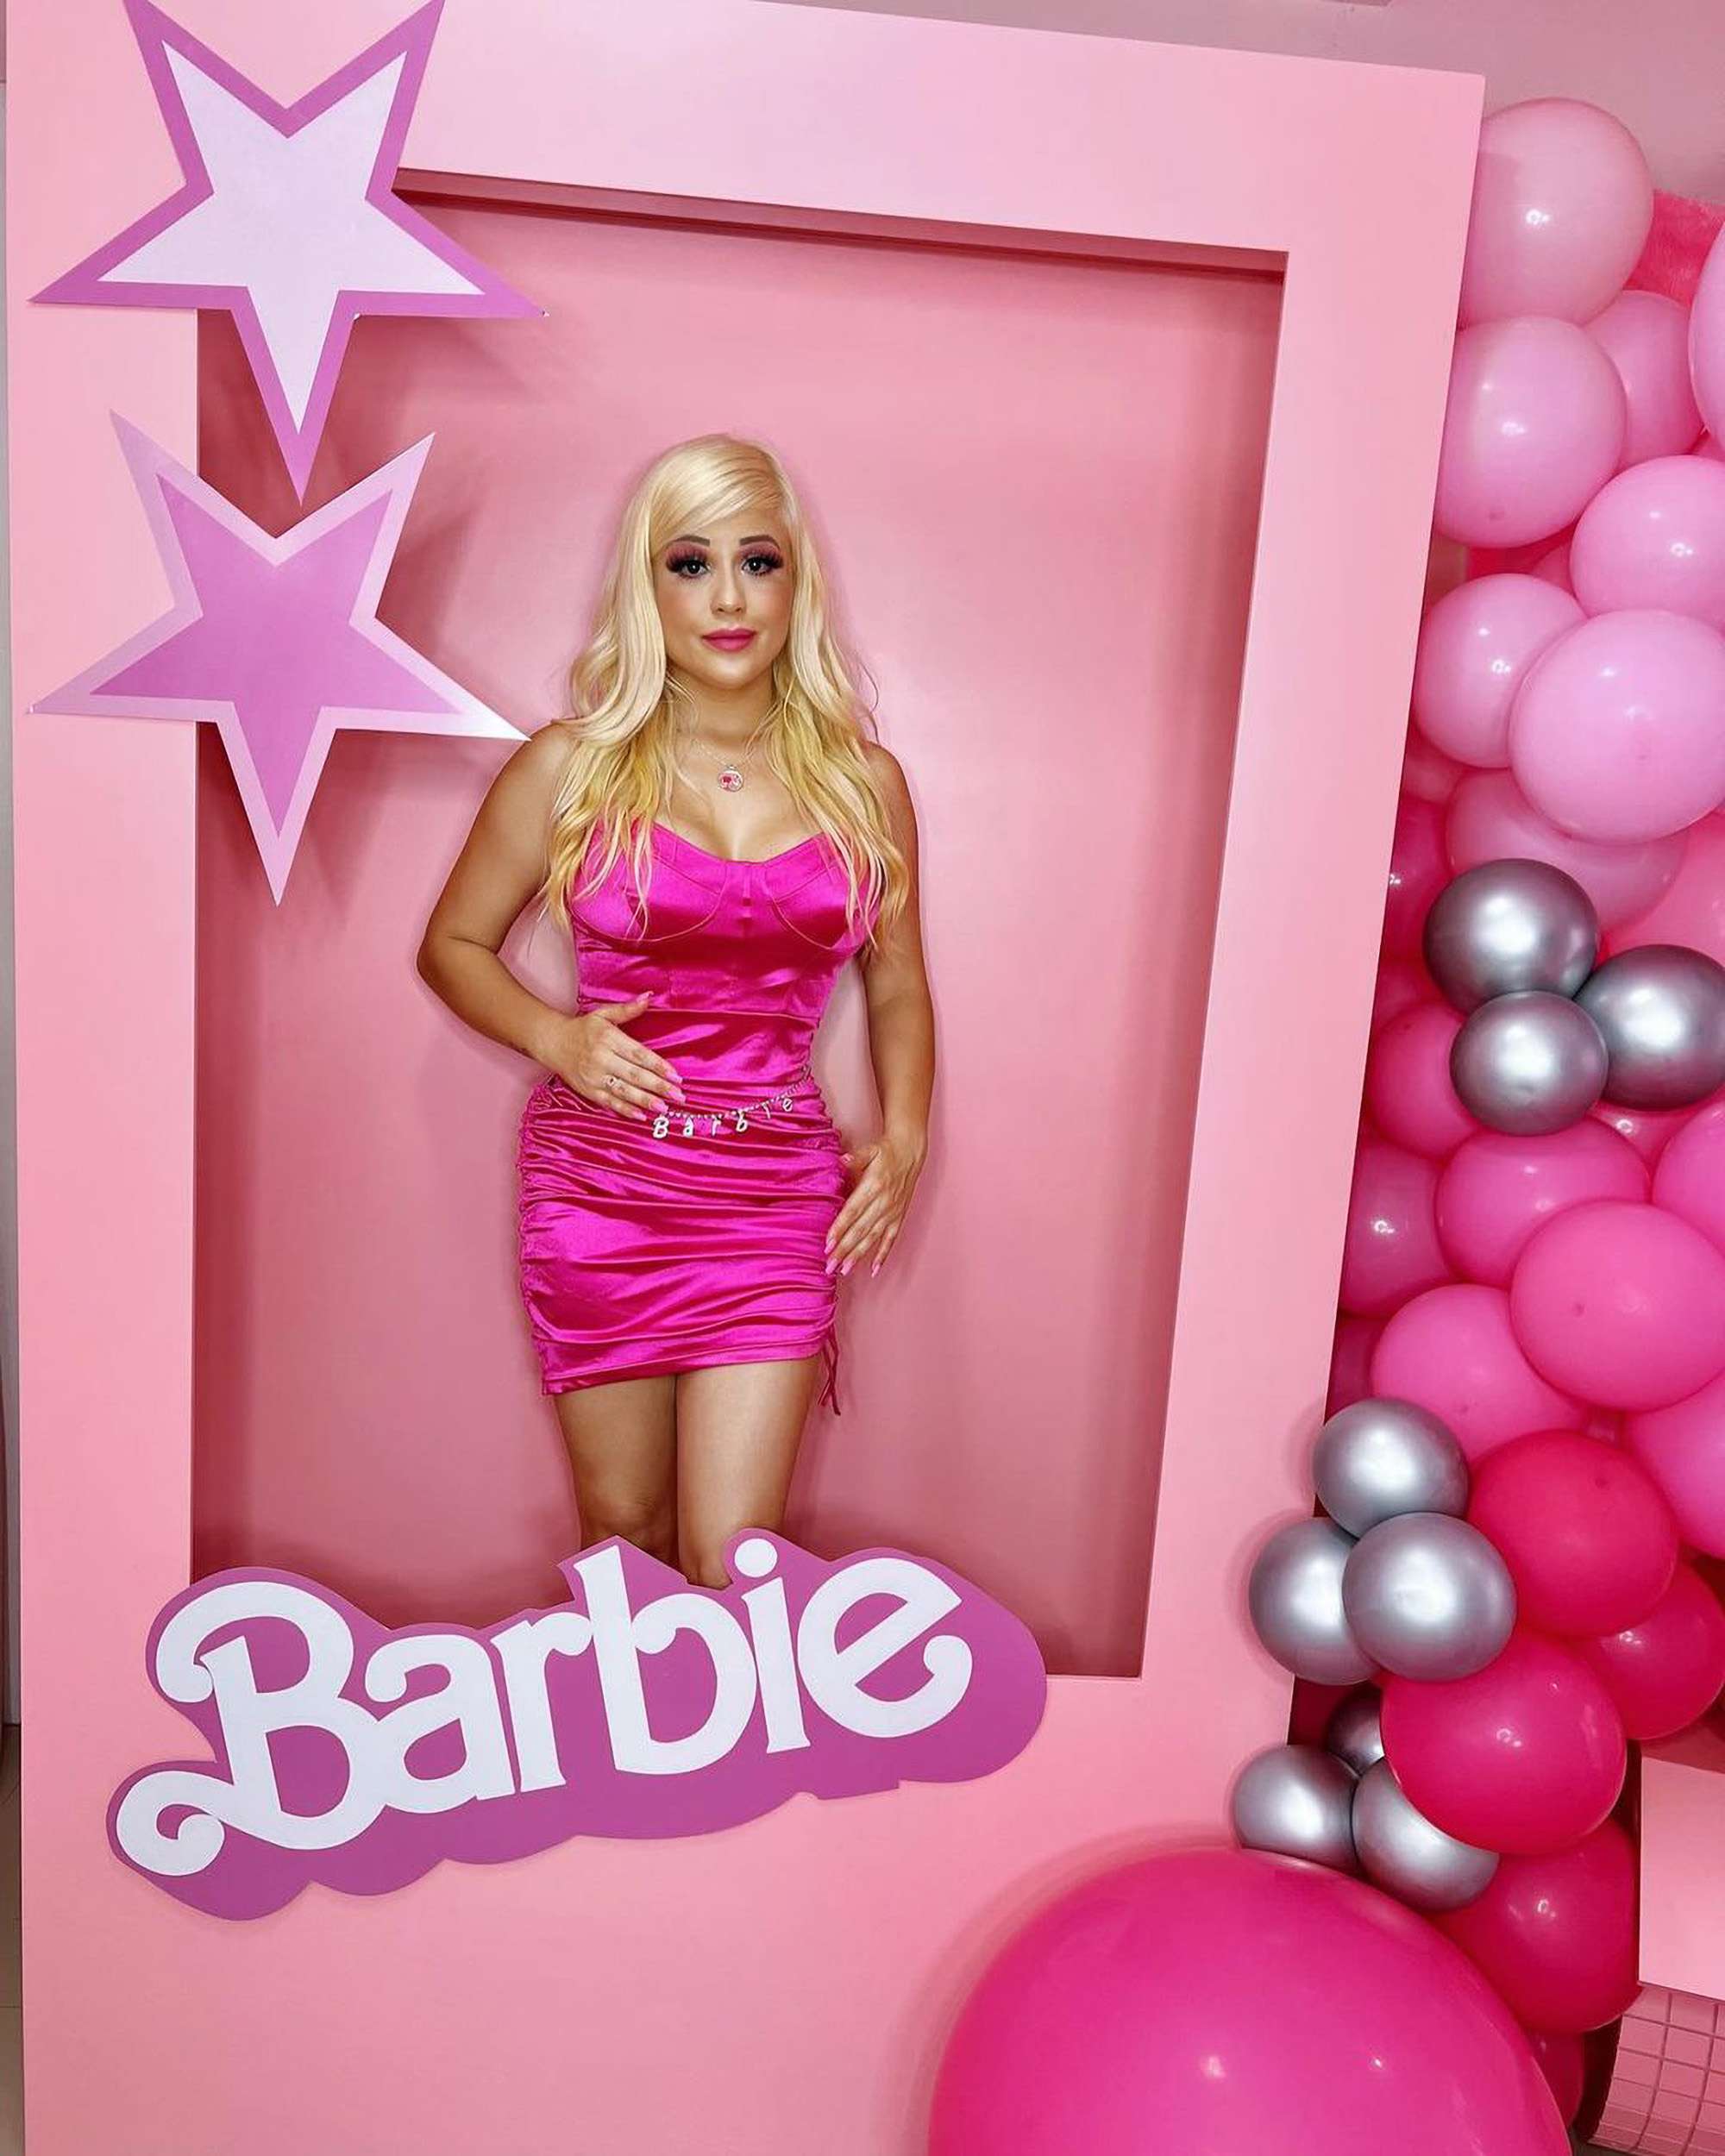 Read more about the article Brazilian Barbie Gets Her Dream Pink House Ahead Of Margot Robbie Summer Blockbuster